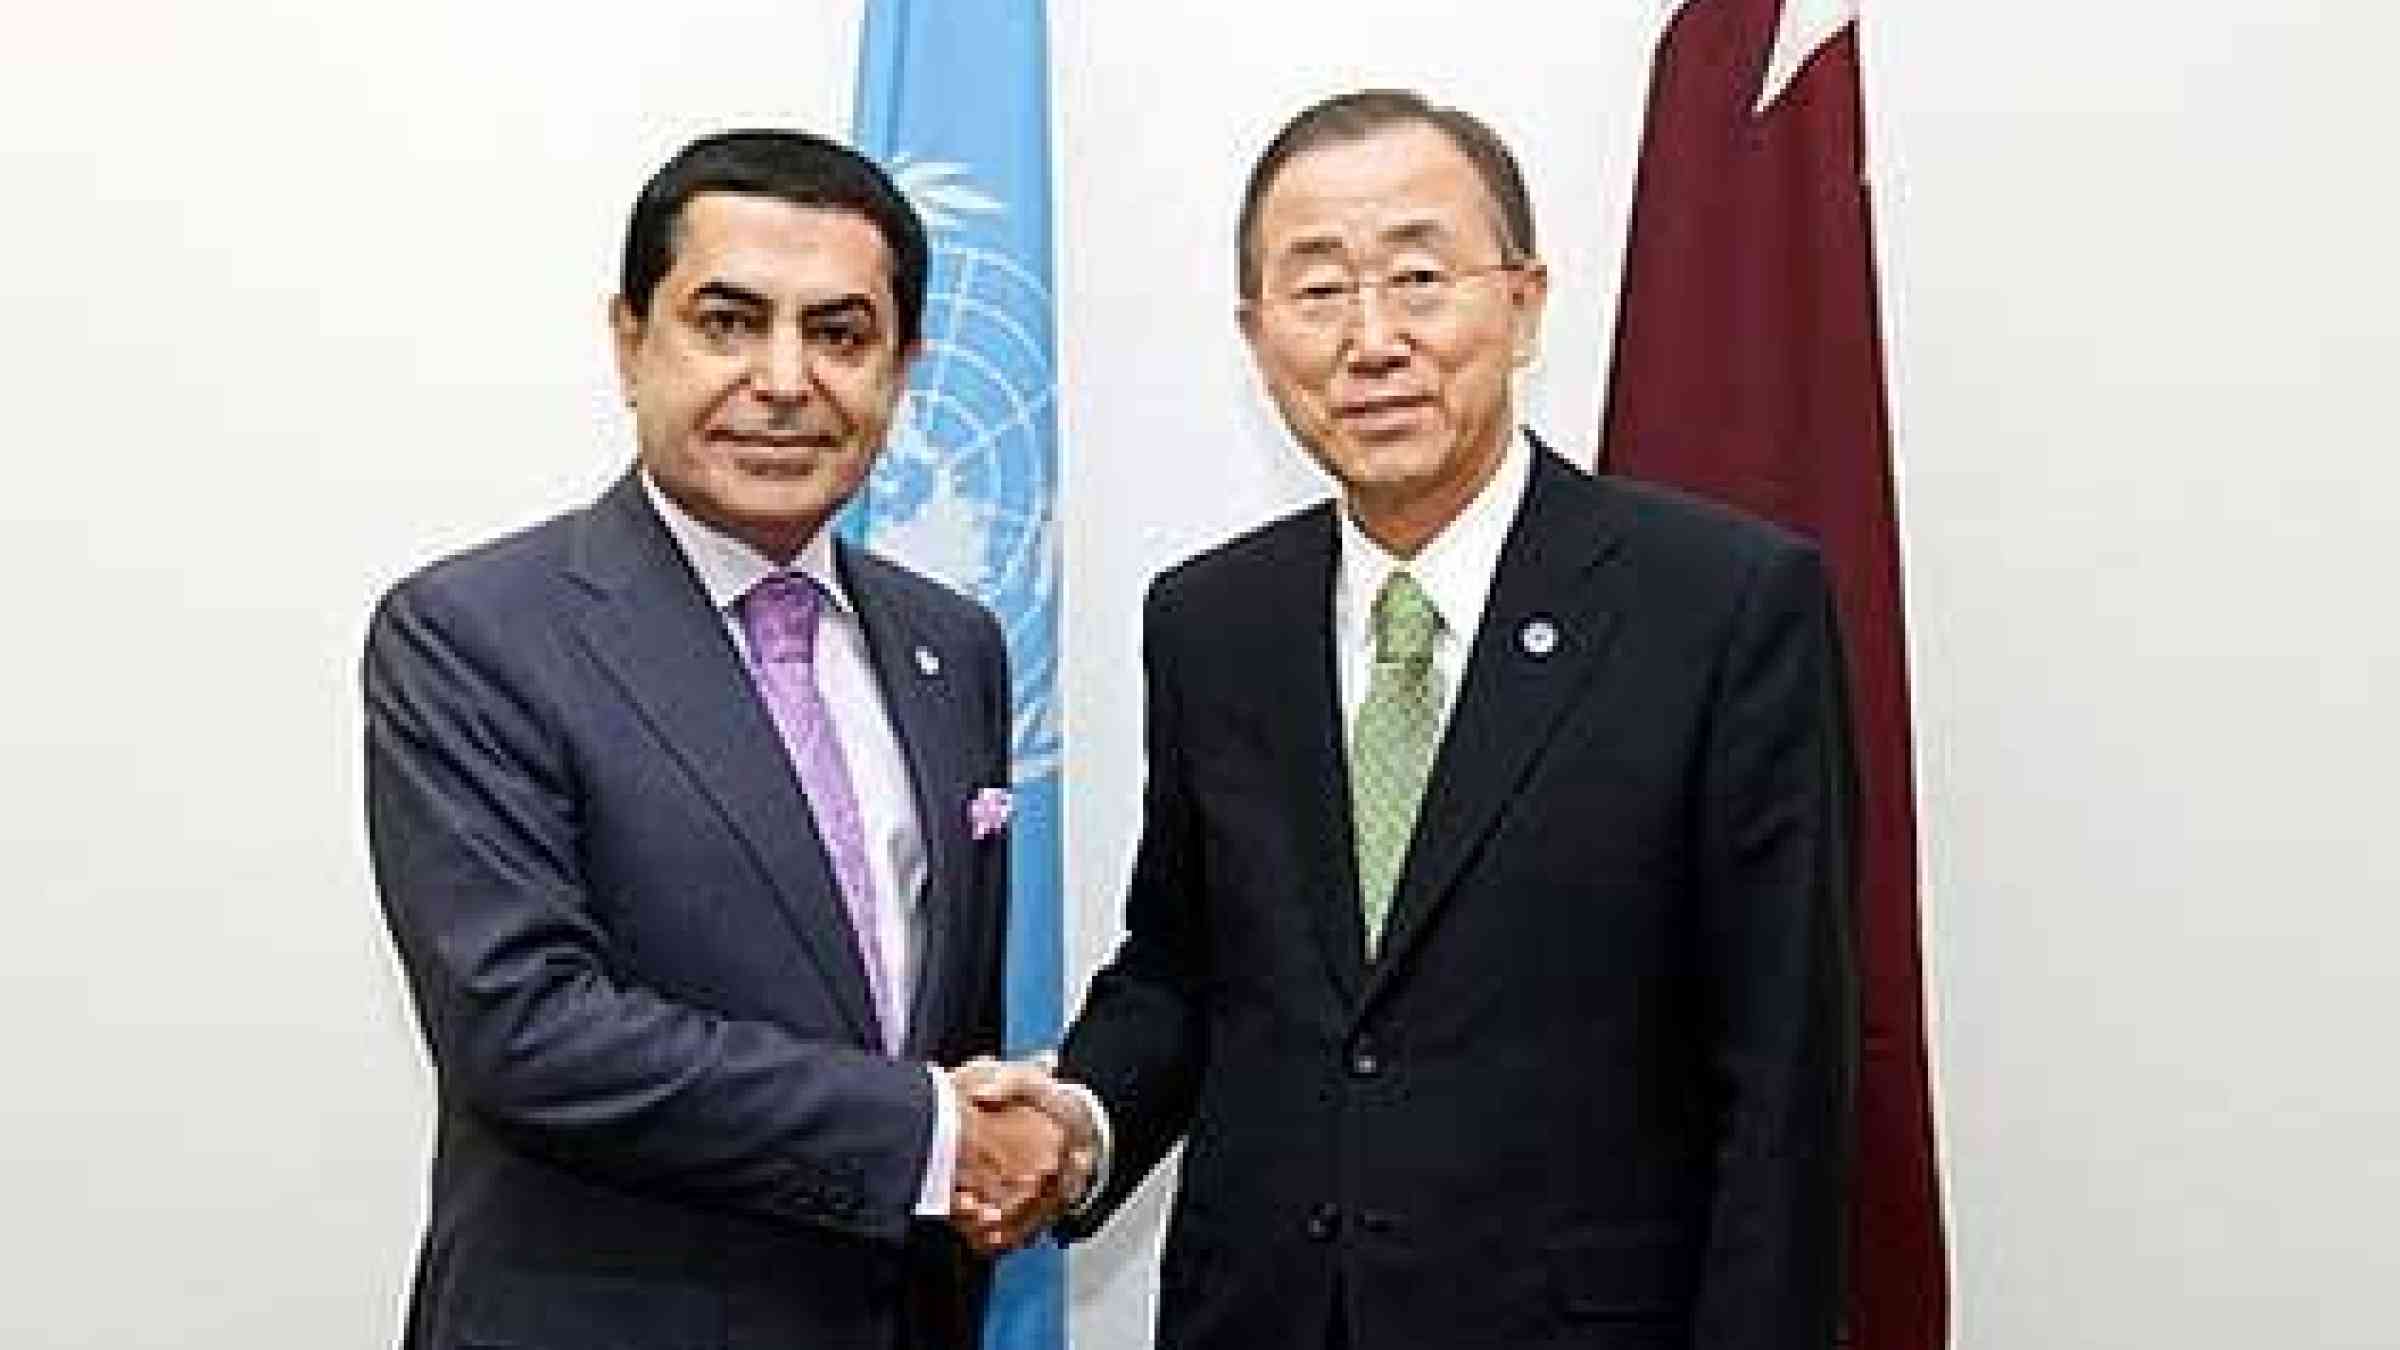 Nassir Abdulaziz Al-Nasser (left), President of the sixty-sixth session of the General Assembly, meets with Secretary-General Ban Ki-moon, 6 October 2011